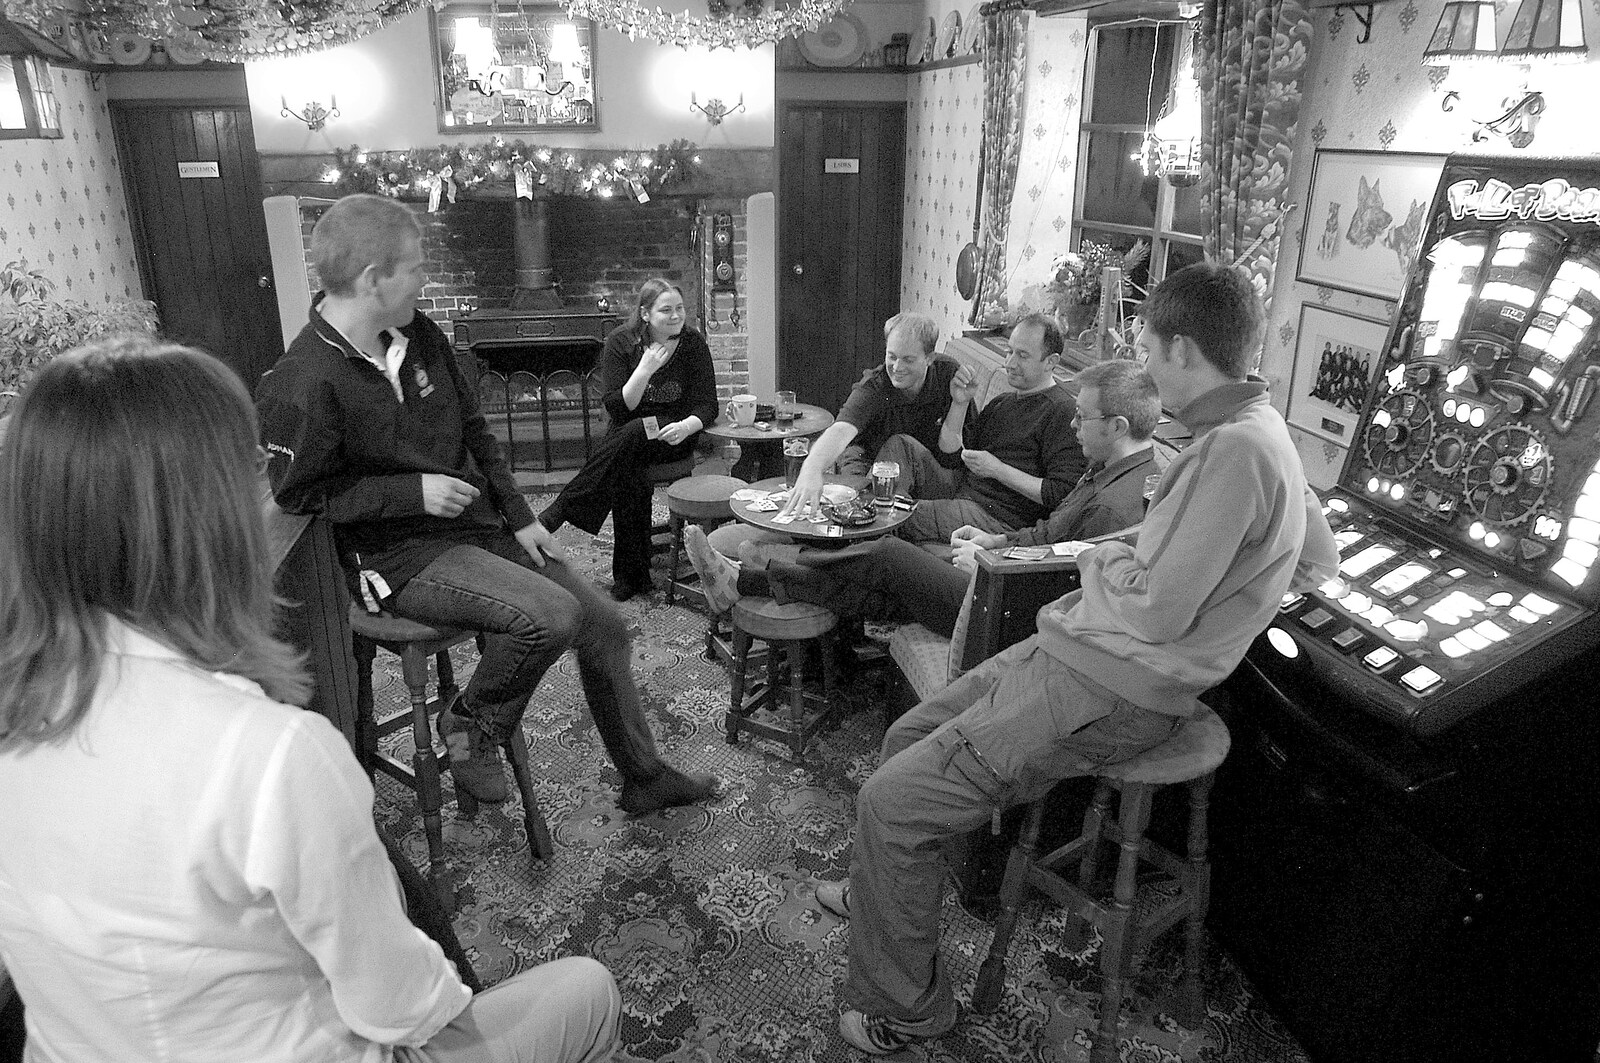 A card game occurs from New Year's Eve and Day, Thorndon and Thornham, Suffolk - 1st January 2006